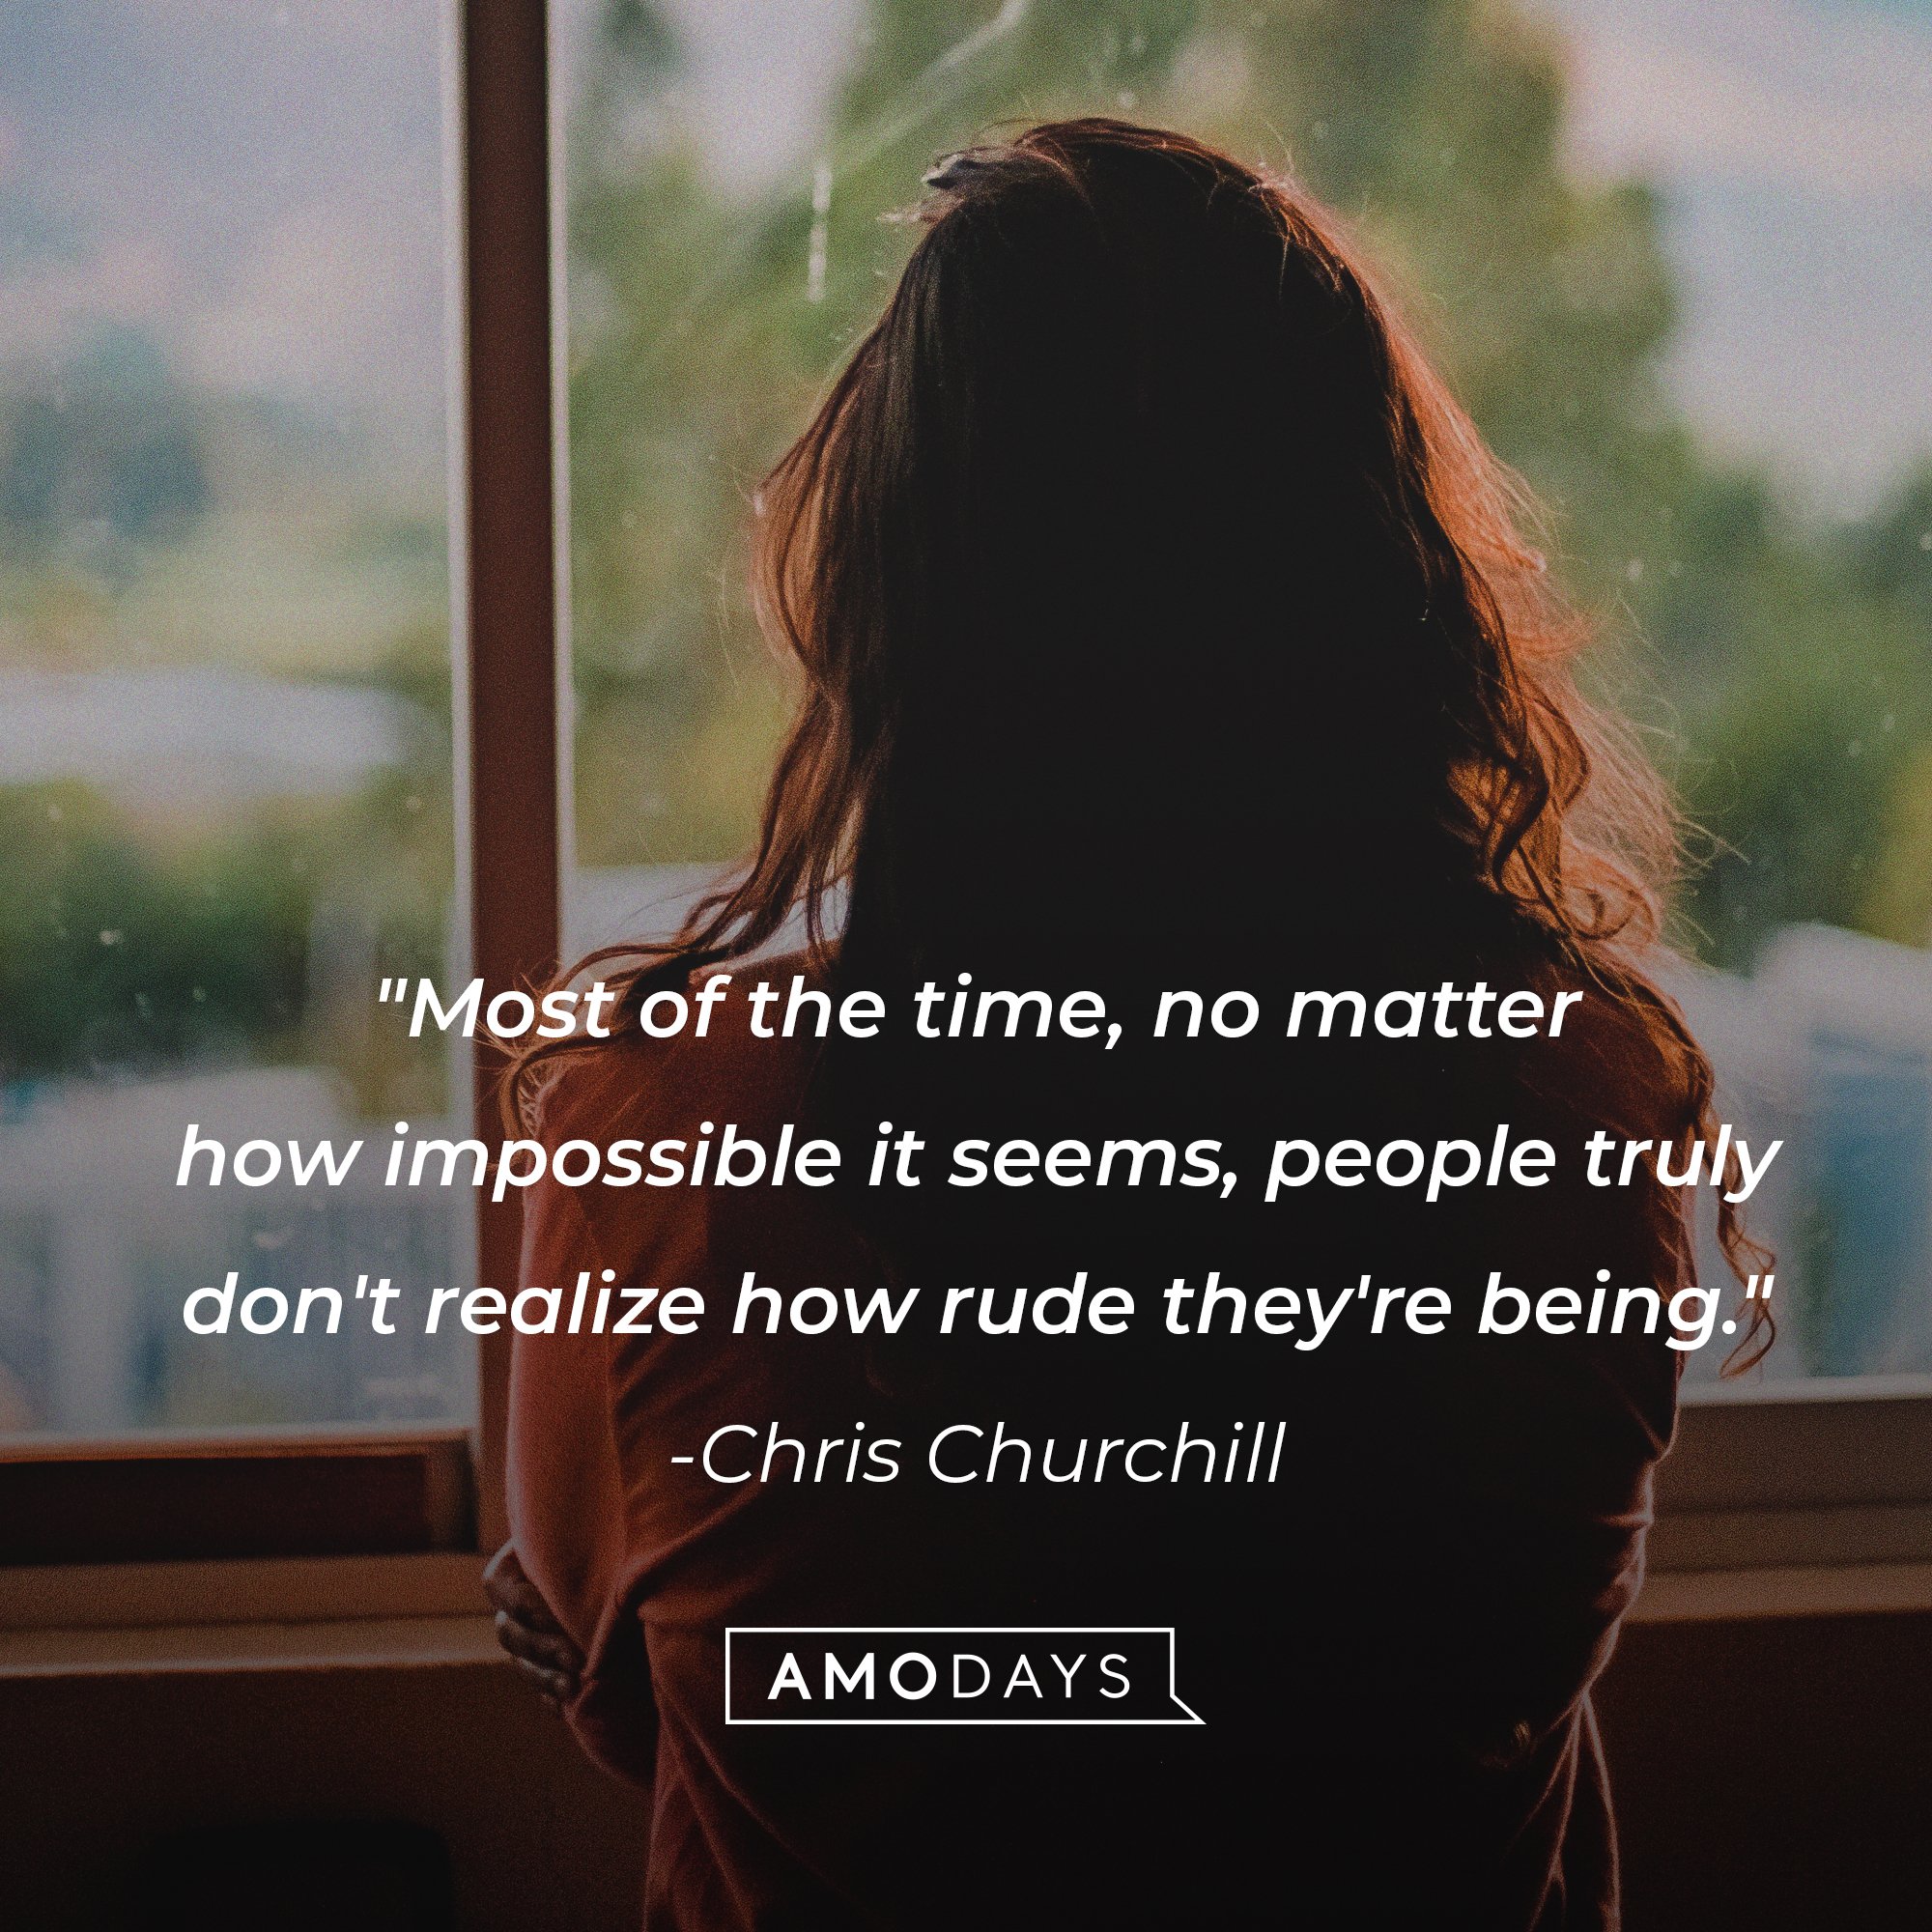 Chris Churchill’s quote: "Most of the time, no matter how impossible it seems, people truly don't realize how rude they're being." | Image: AmoDays